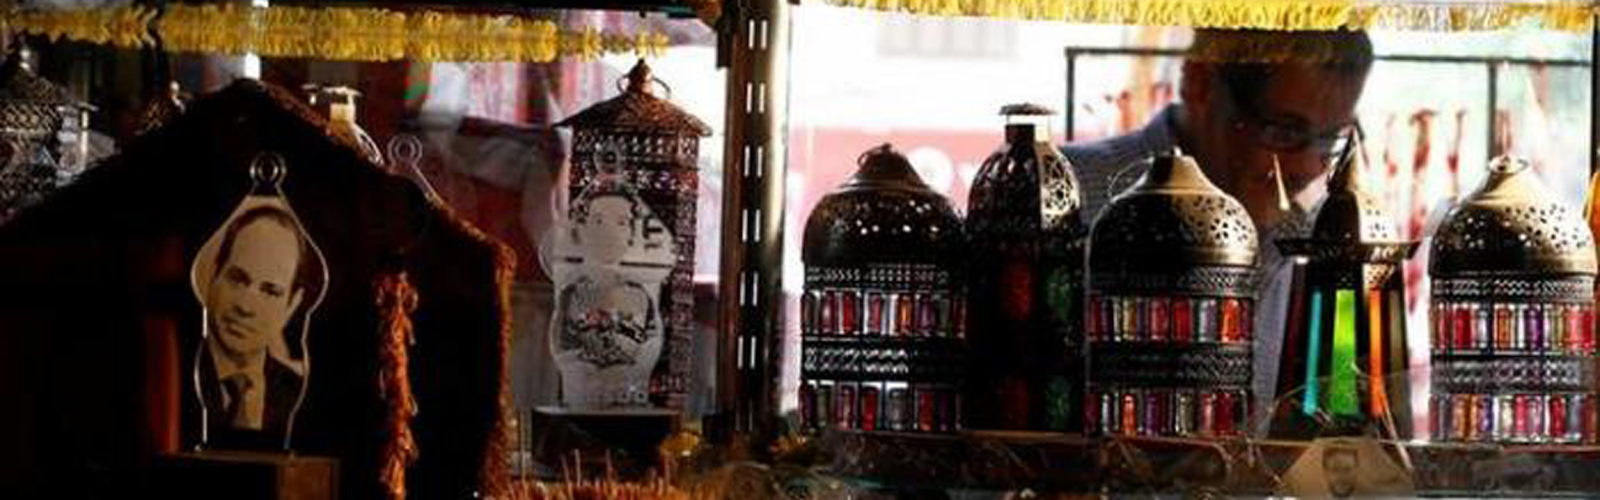 Cairo lantern-maker champions old craft against Chinese imports